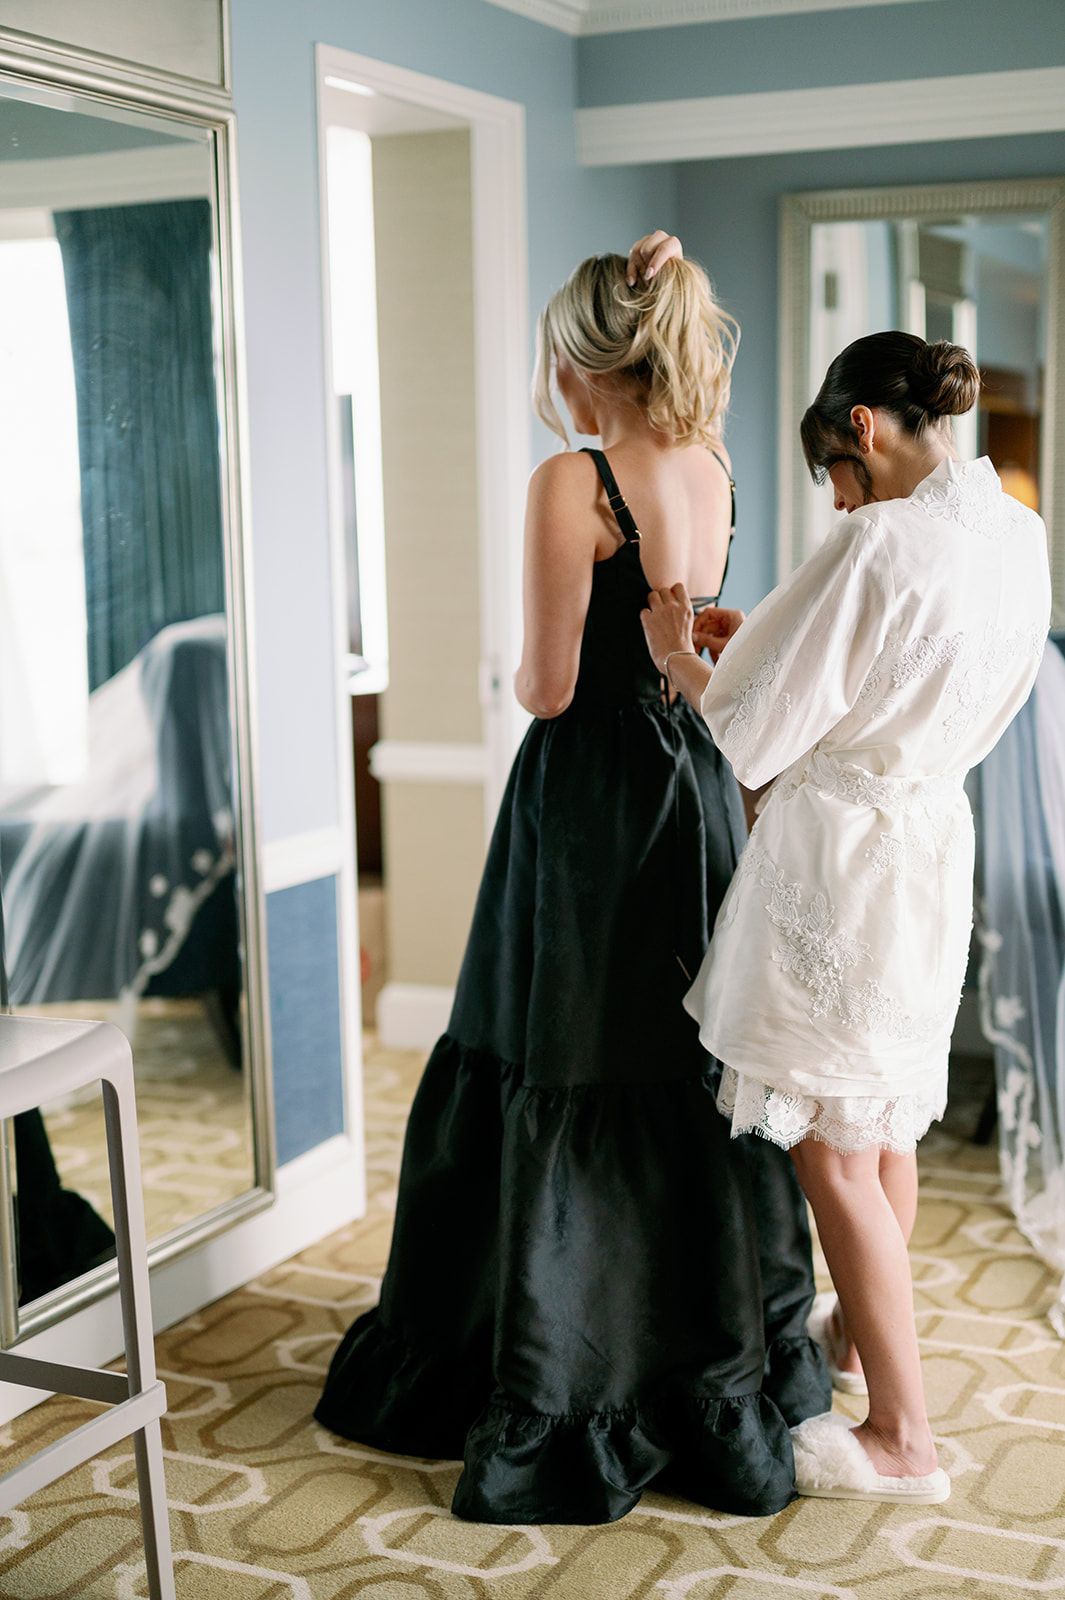 Bride helping her maid of honor with her dress candid getting ready photo. 